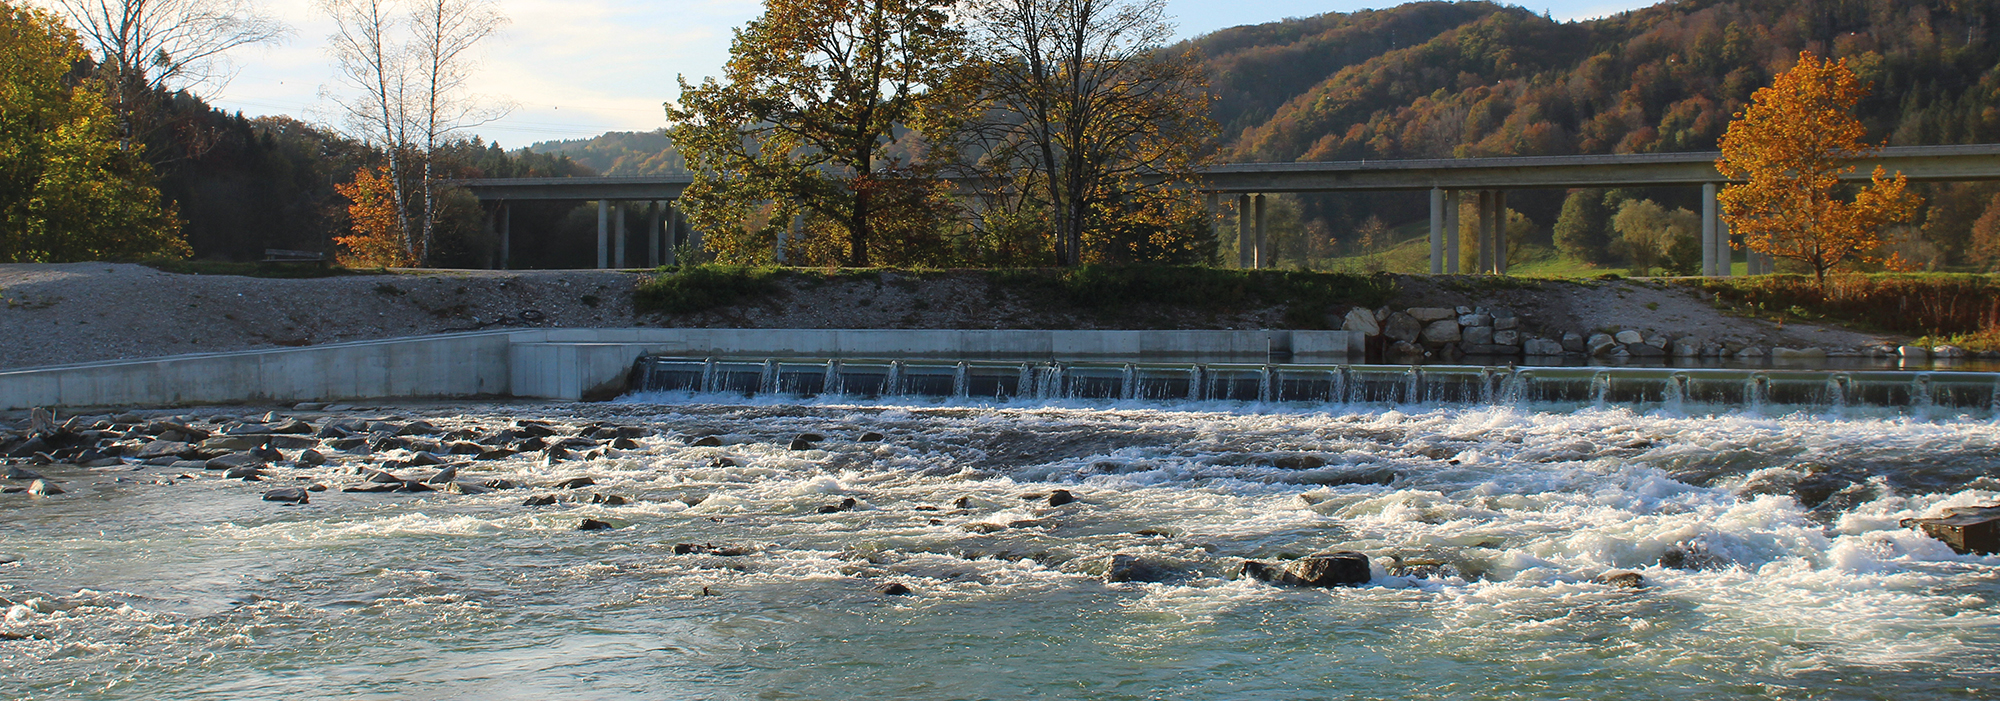 Hydropower solutions for developingand emerging countries